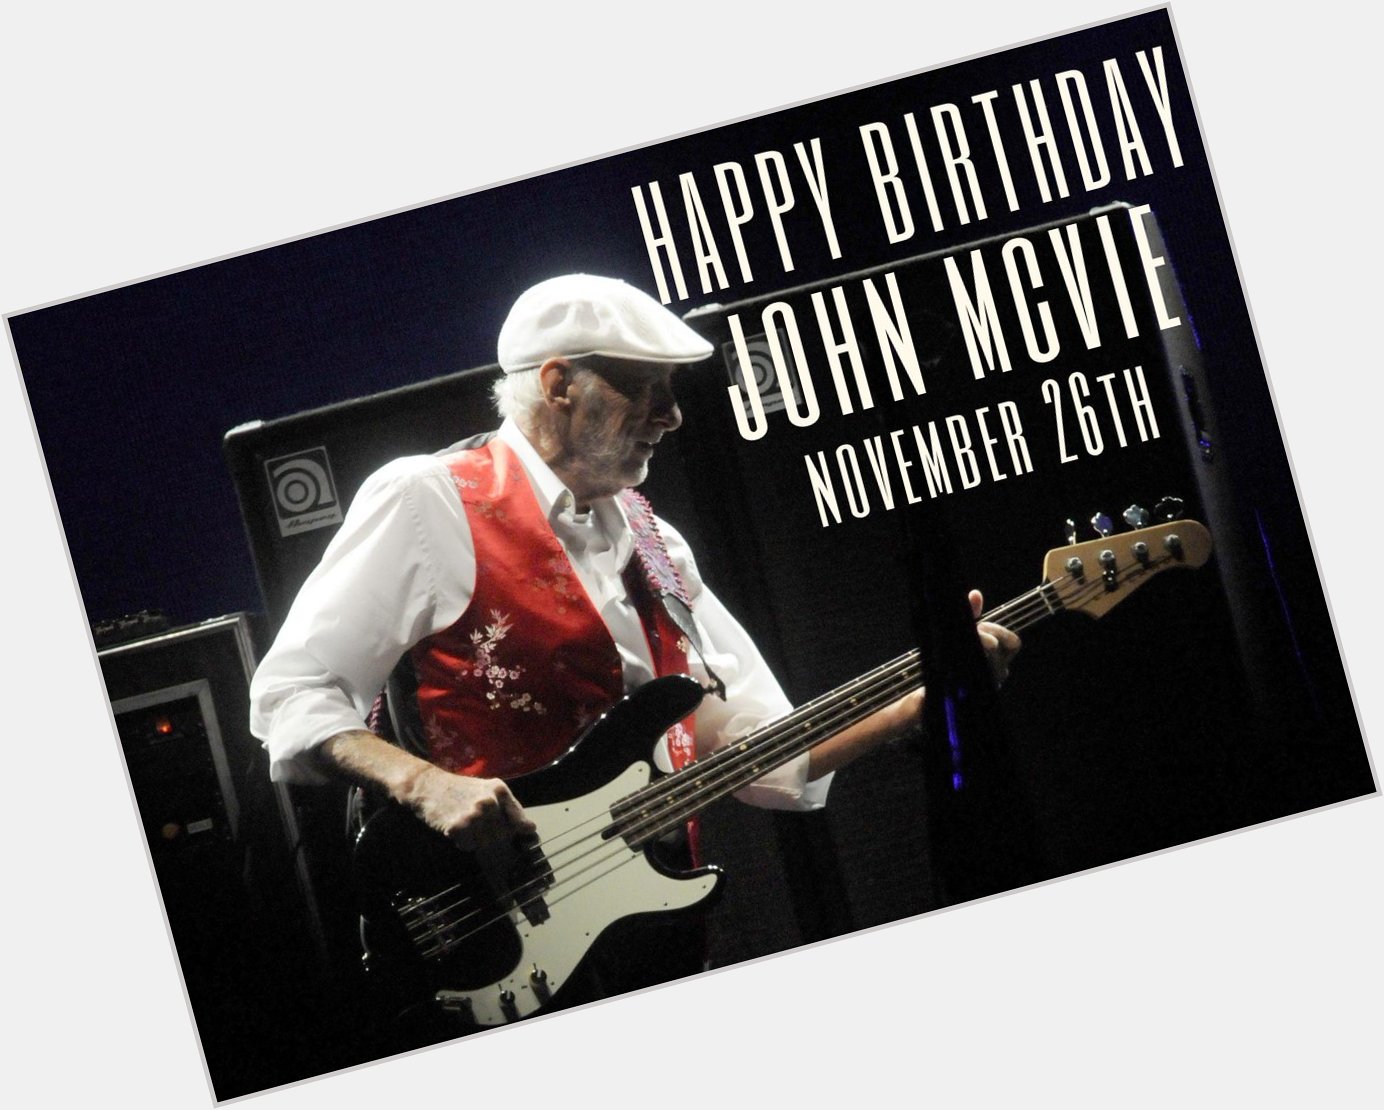 HAPPY BIRTHDAY to John McVie! Born on this day Nov 26, 1945. Have a great day! THANK YOU for the music! 